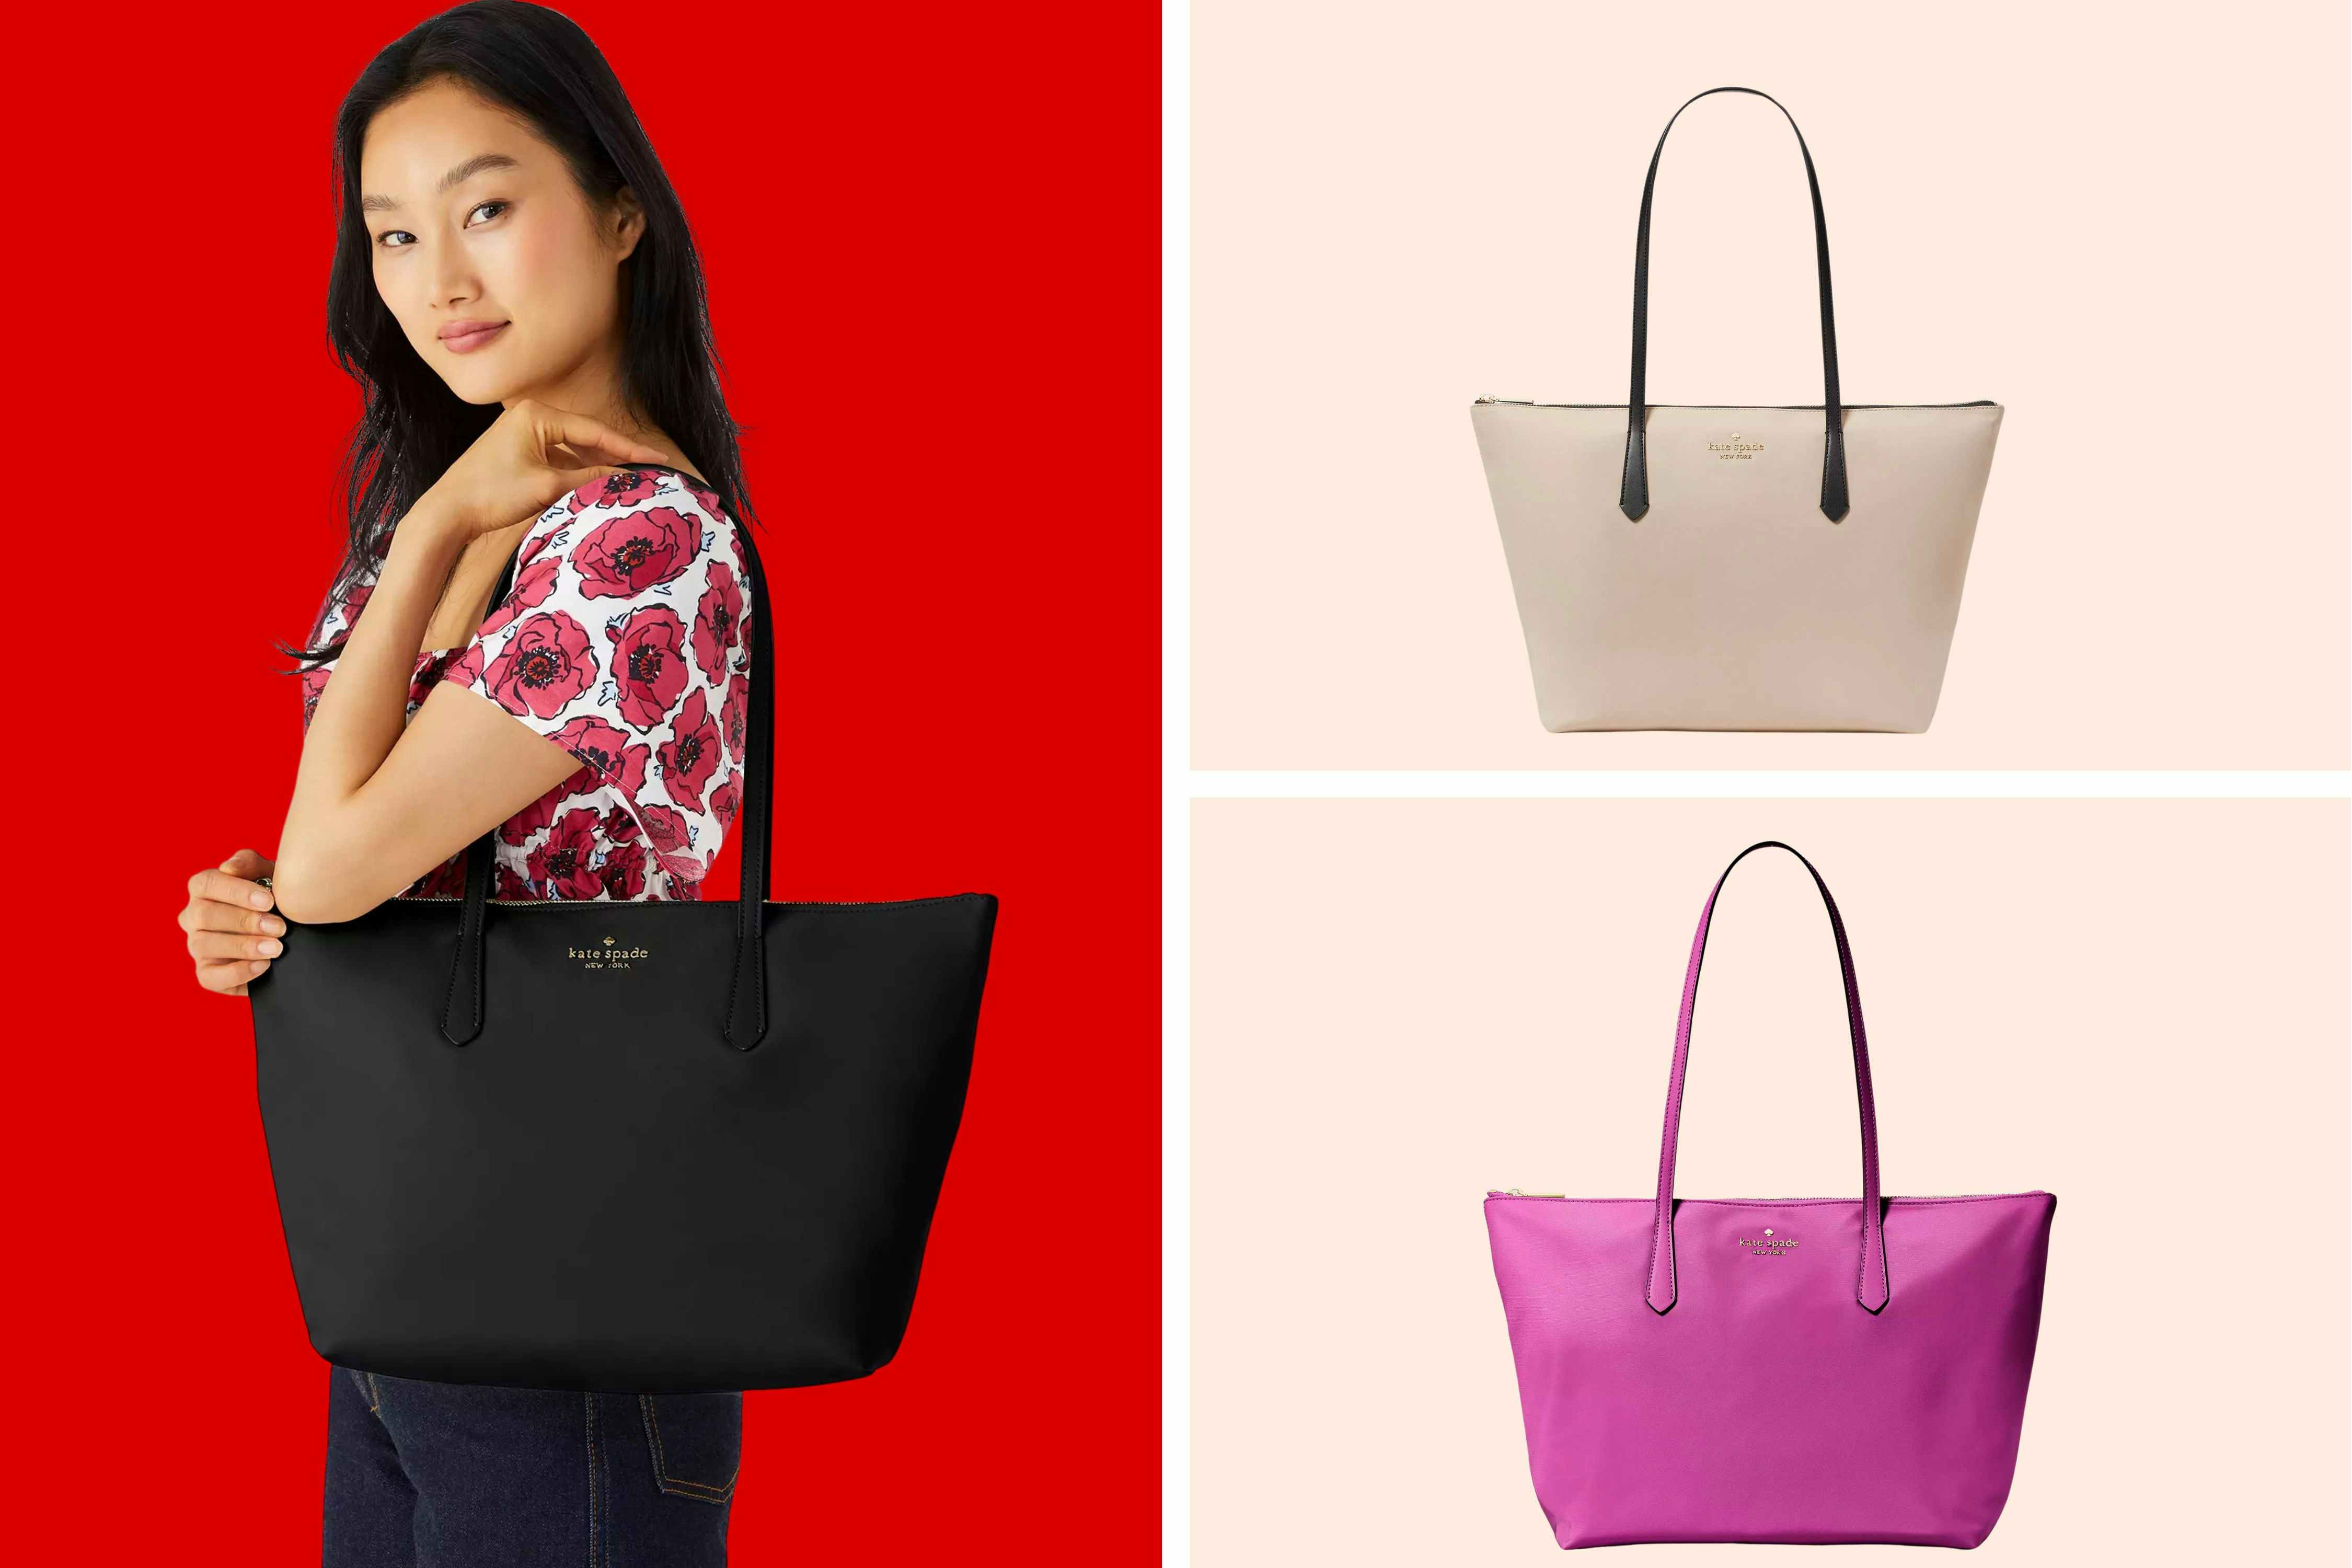 This Nylon Kate Spade Tote Is $230 Off — and It Comes in 5 Colors